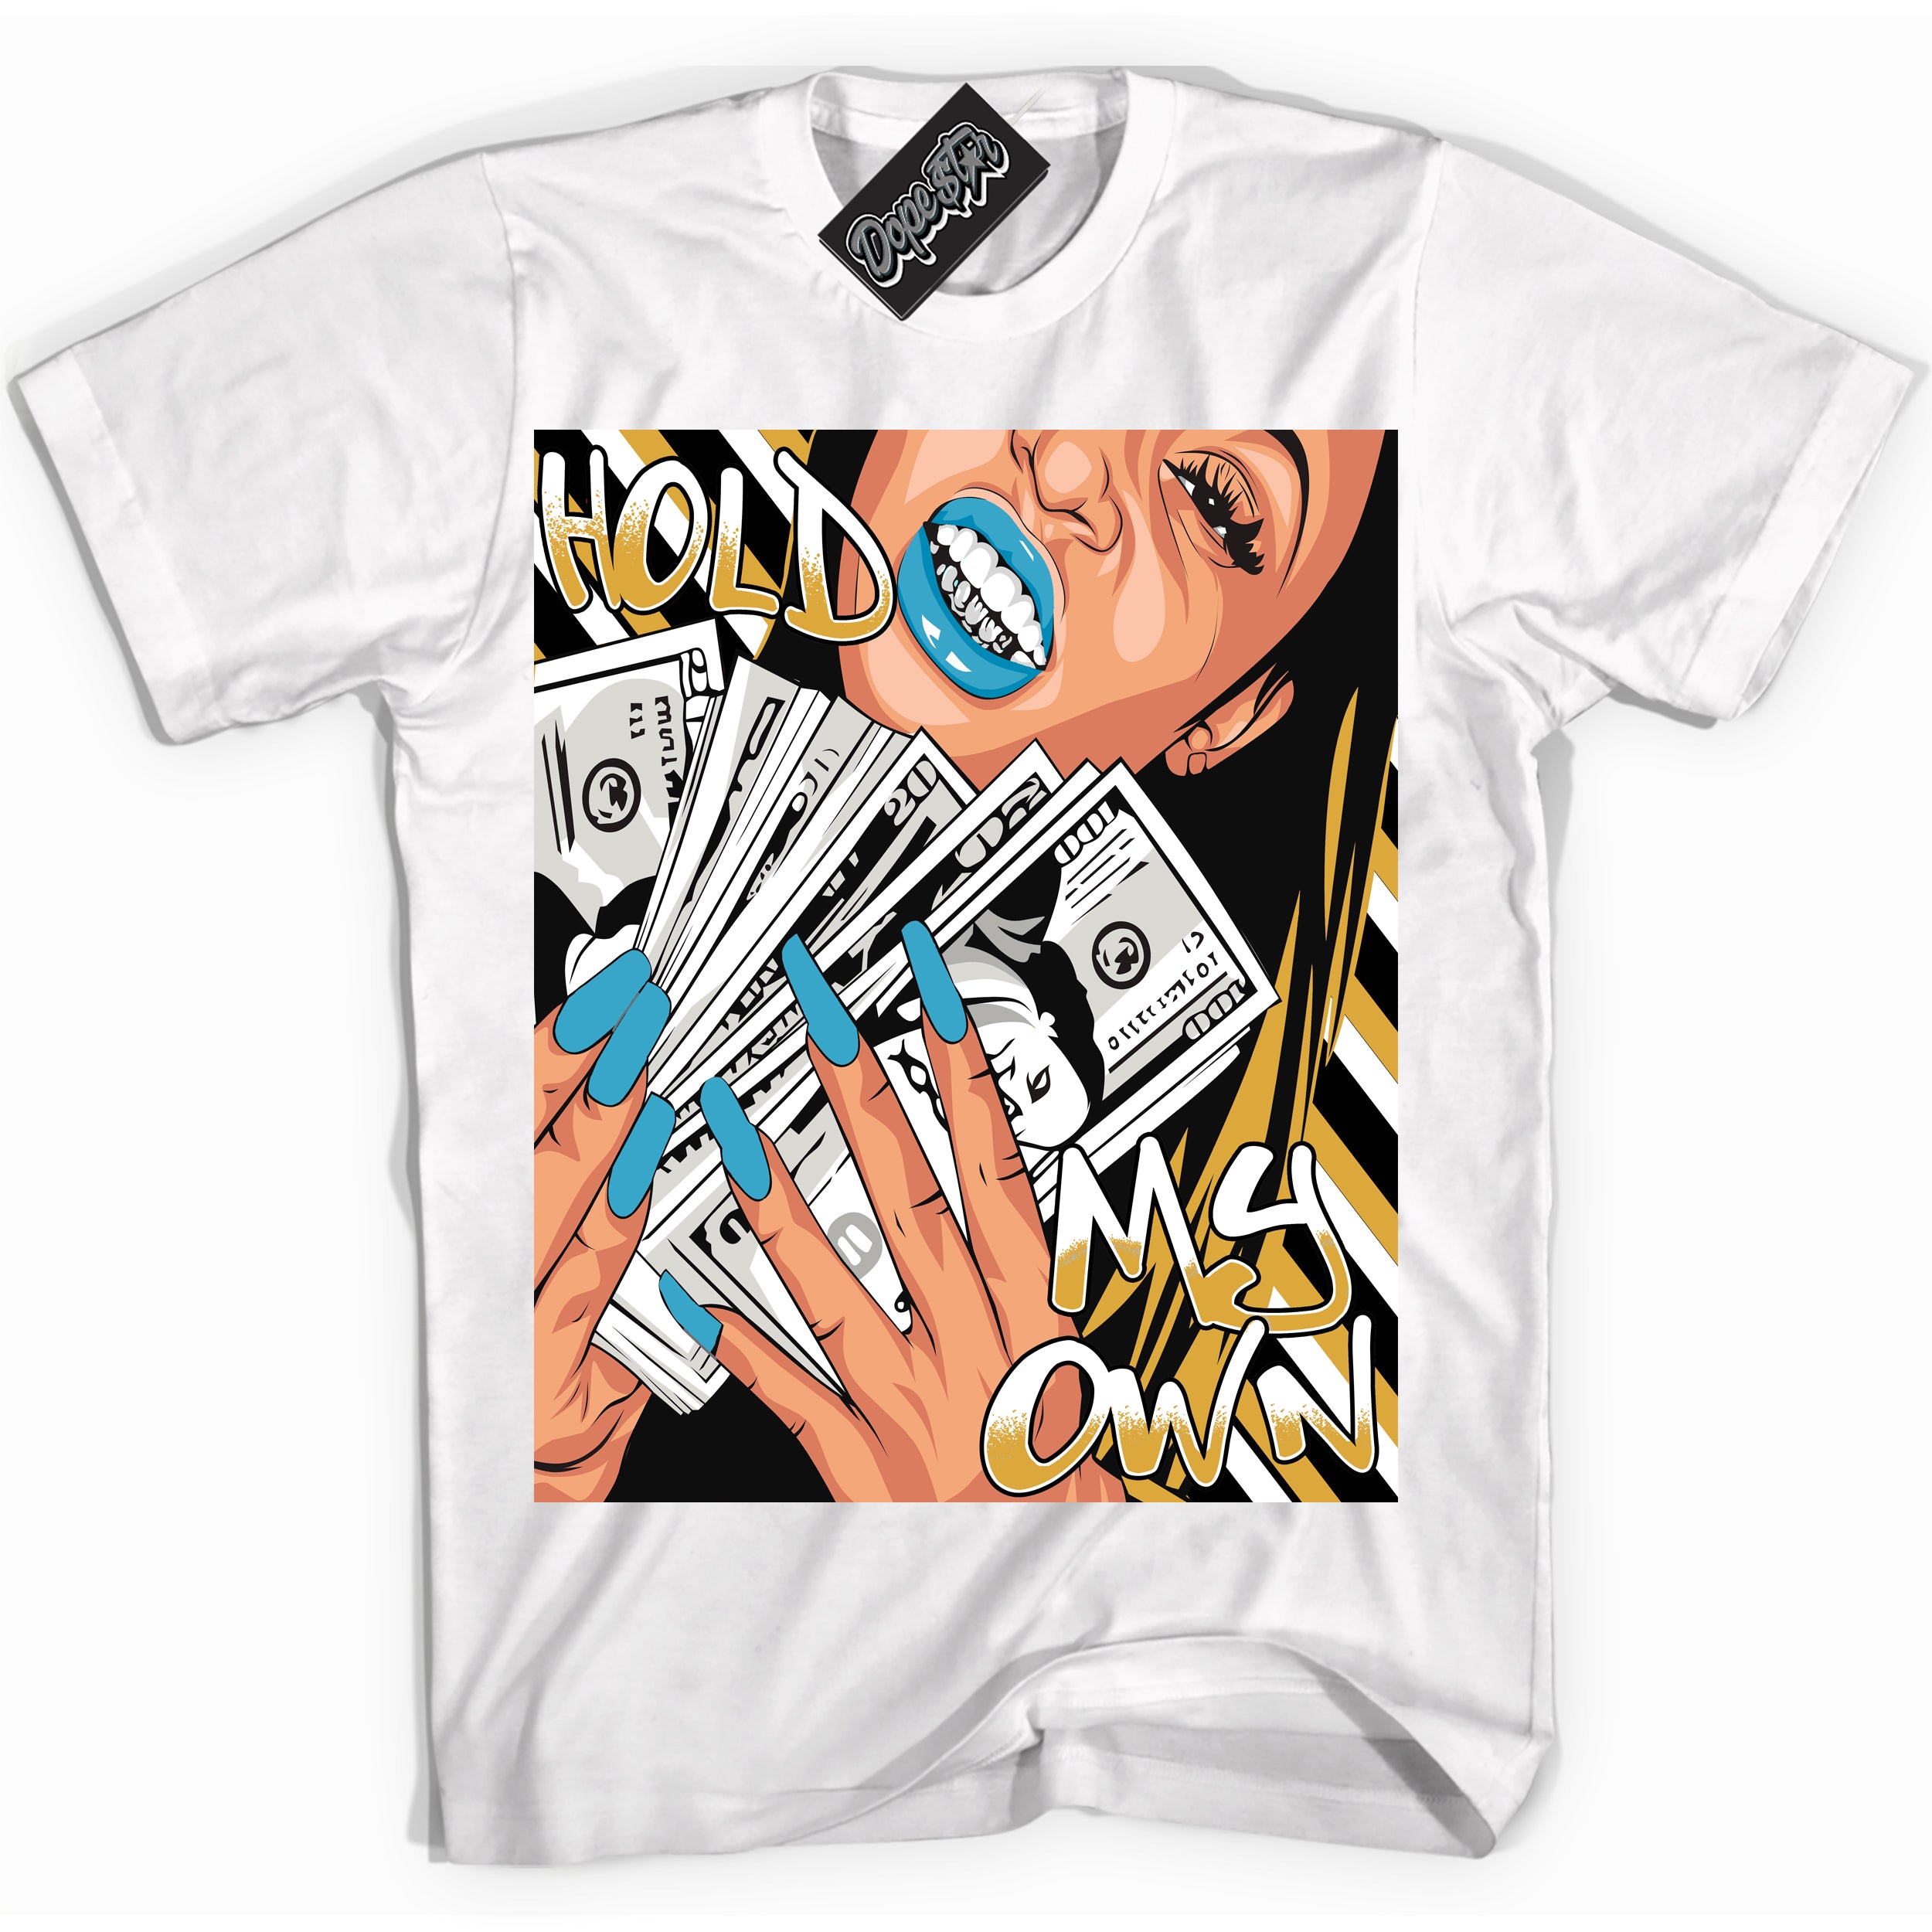 Cool White Shirt with “ Hold My Own” design that perfectly matches Aqua 5s Sneakers.